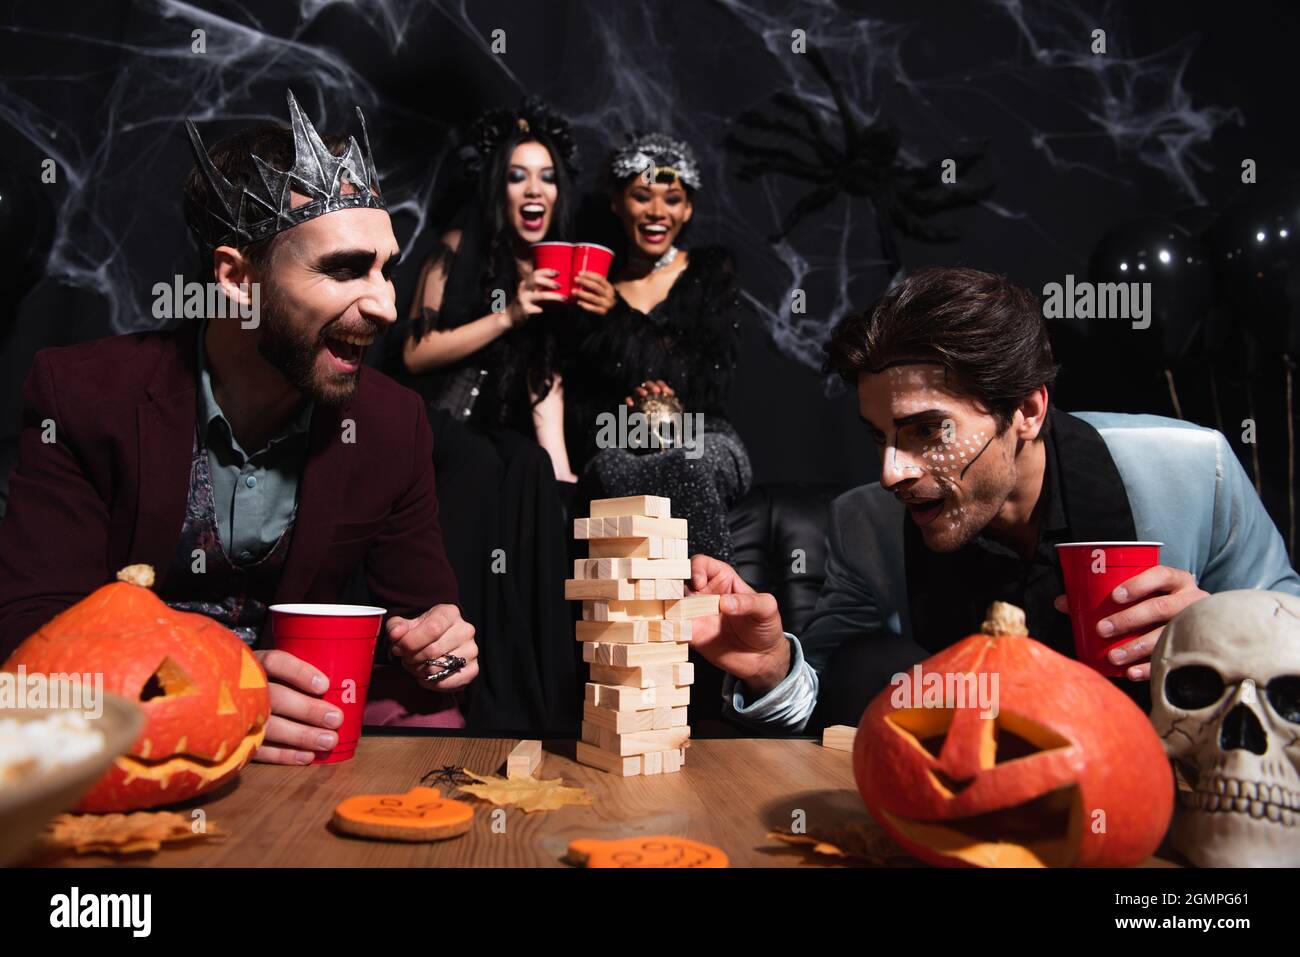 man in halloween makeup playing wood blocks game while blurred interracial women toasting with plastic cups on black Stock Photo